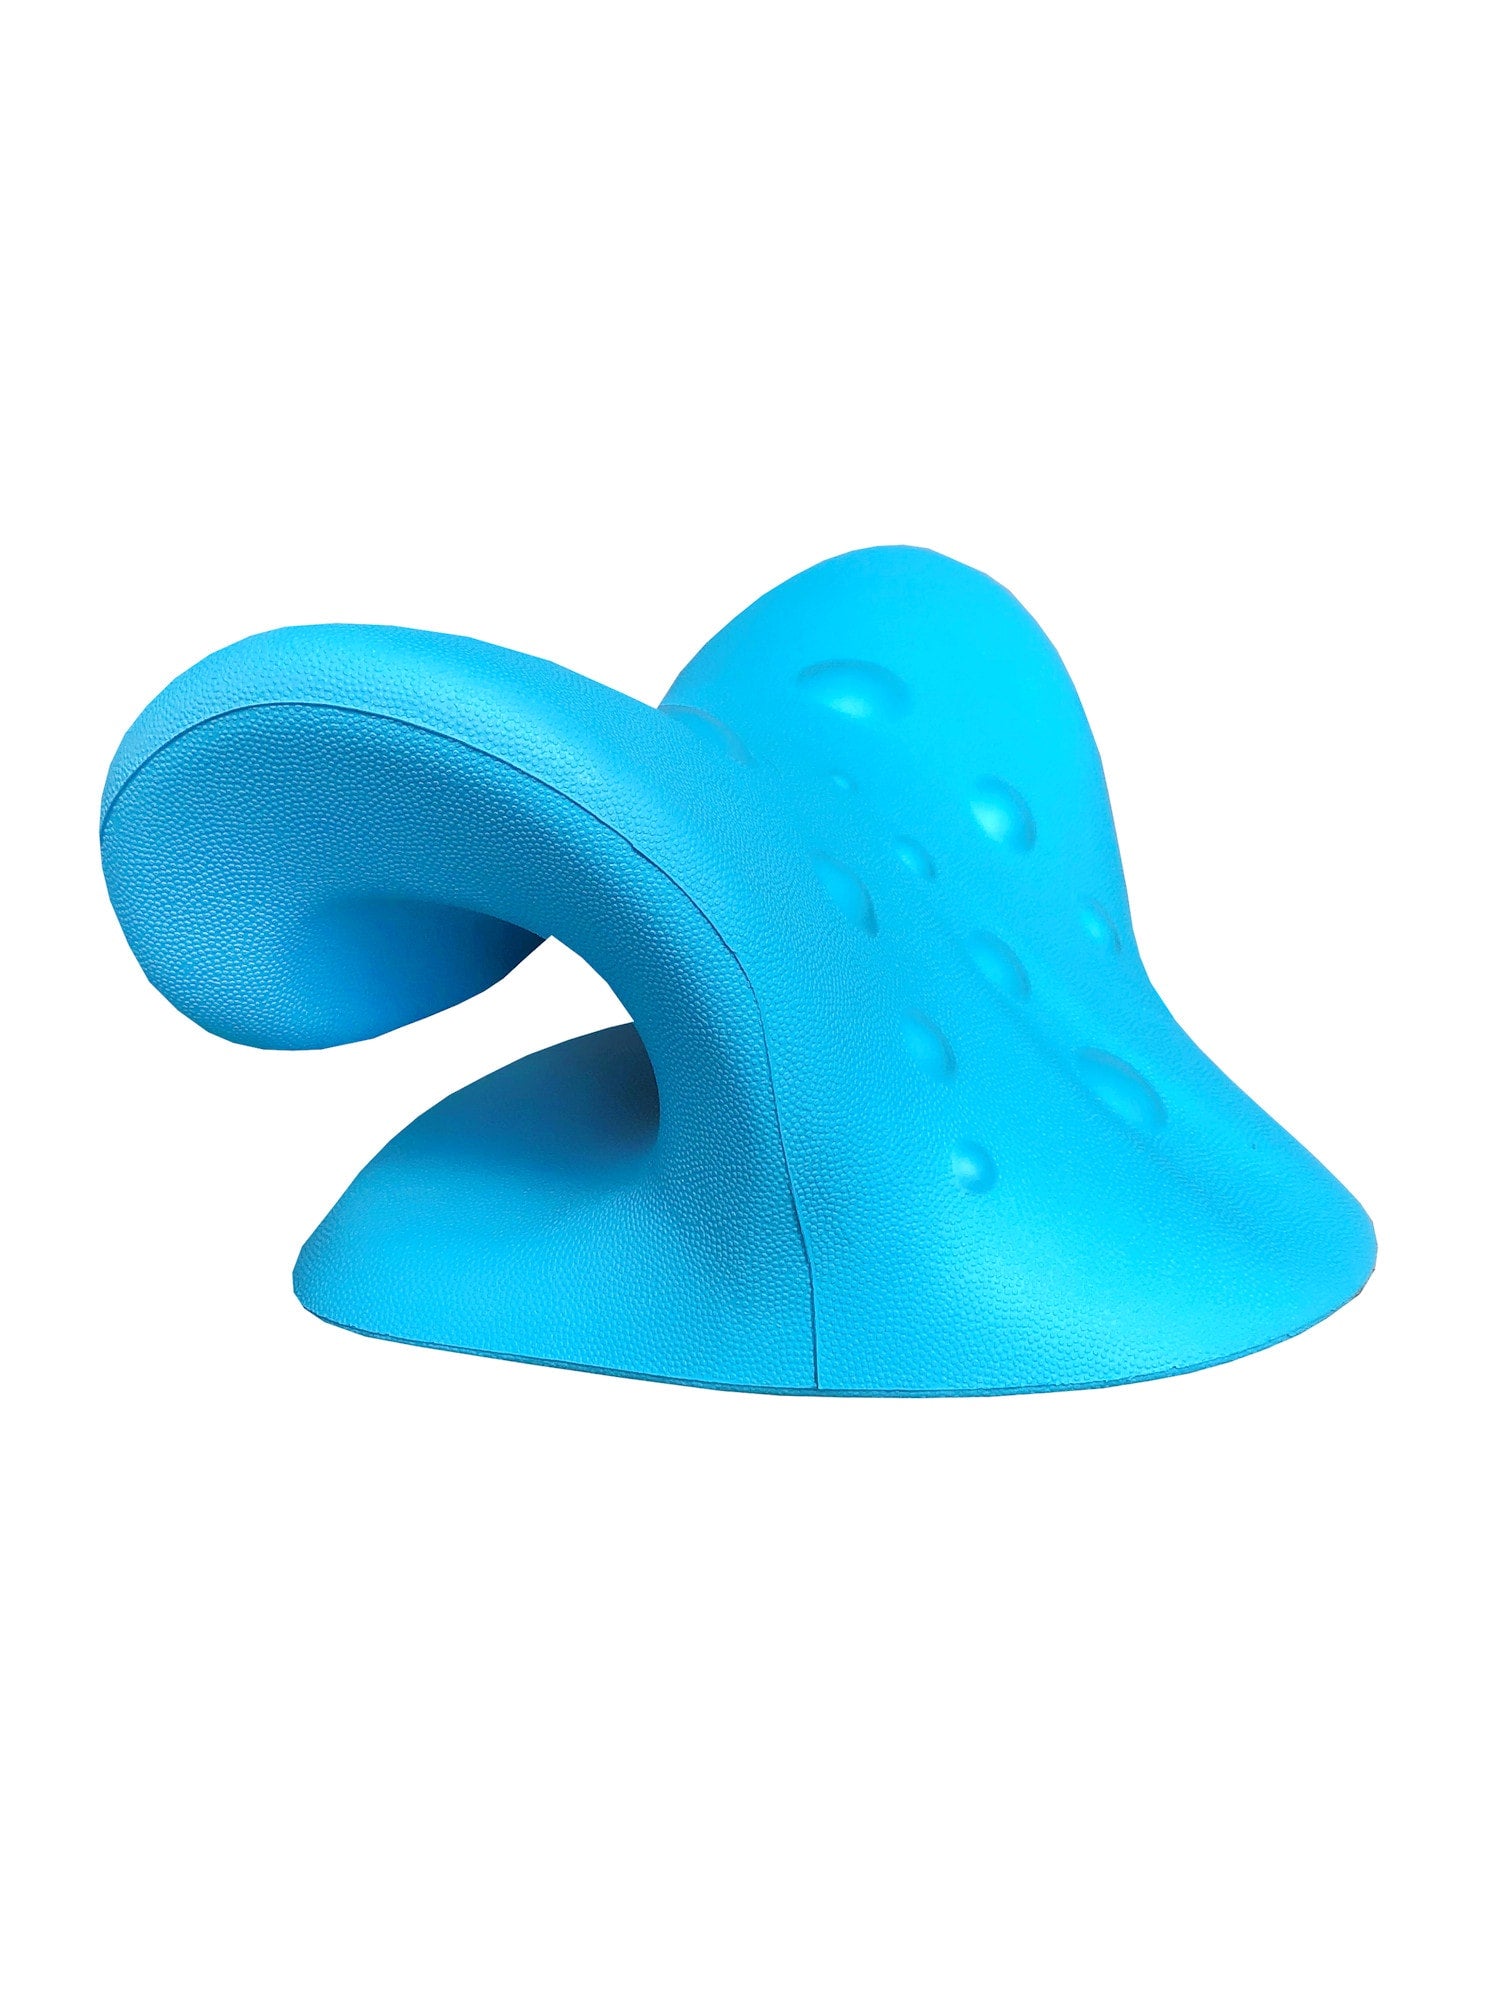 Therapeutic Cervical Support Neck Pillow with Acupressure Nodes